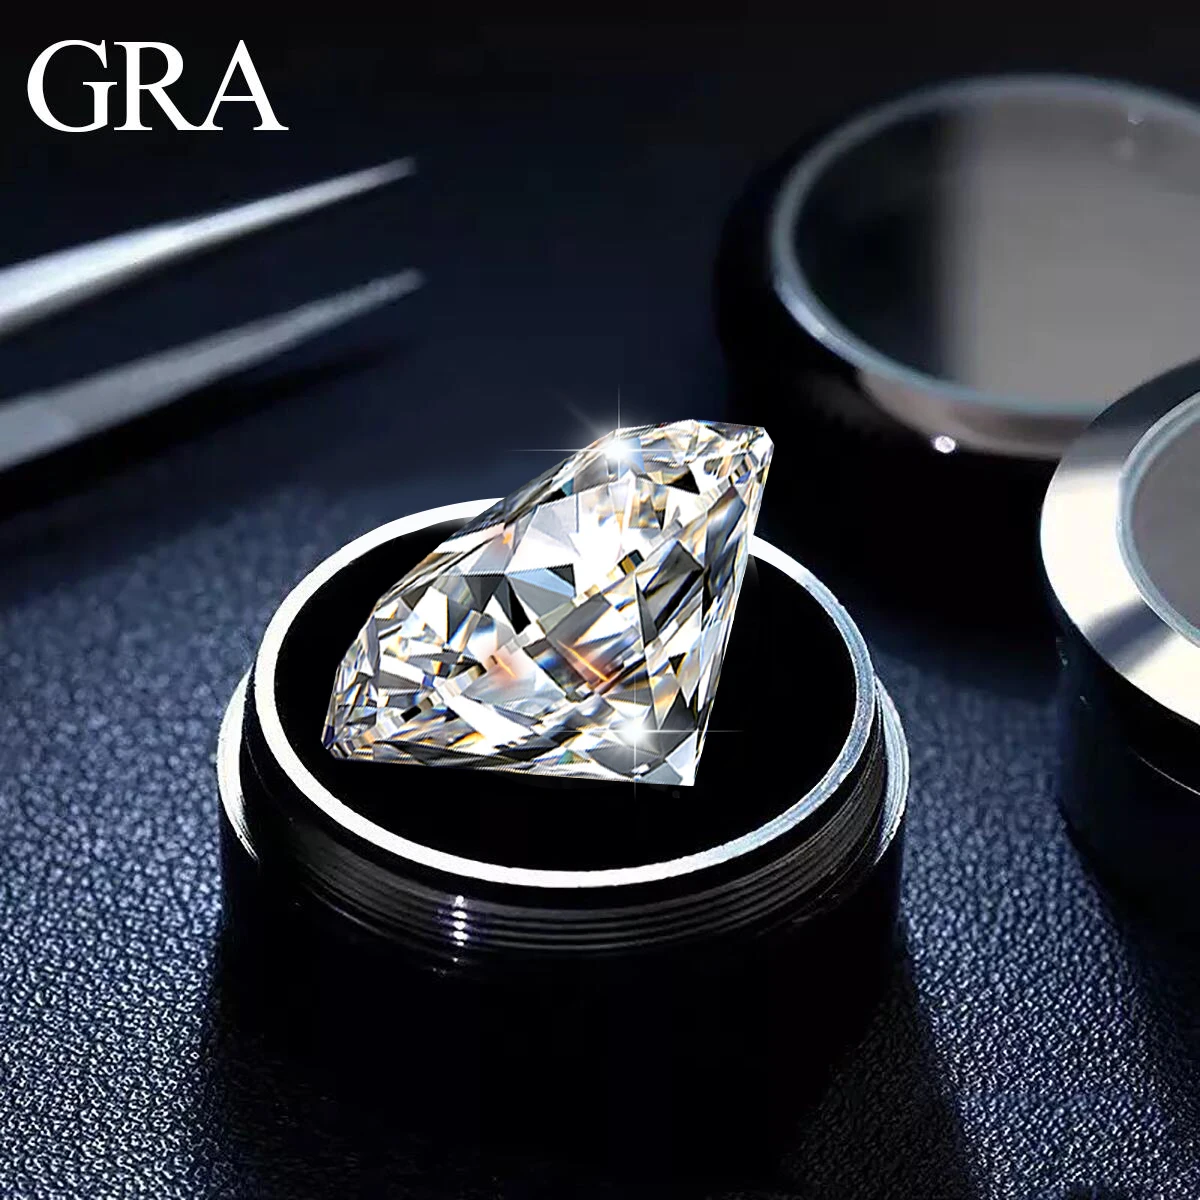 0.1ct To 8ct D Color VVS1 Round Shape Moissanite Stones Brilliant Cut Pass Diamond Tester Loose Gemstone For Women Jewelry Gem